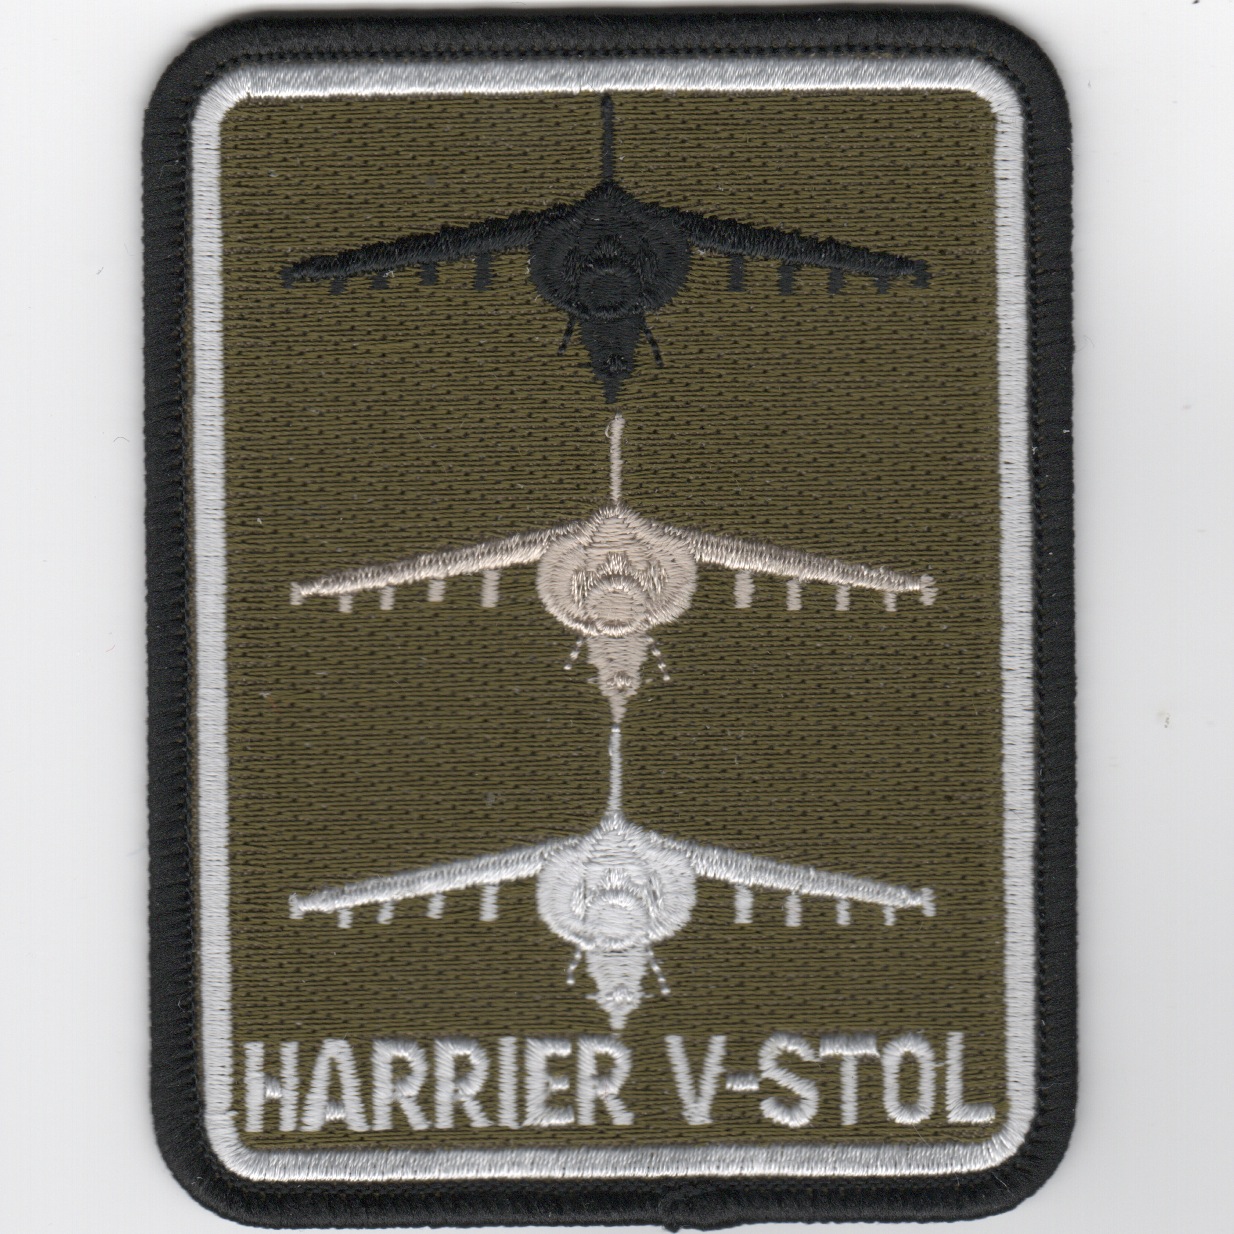 Harrier V/STOL A/C Patch (Rect/Subd)